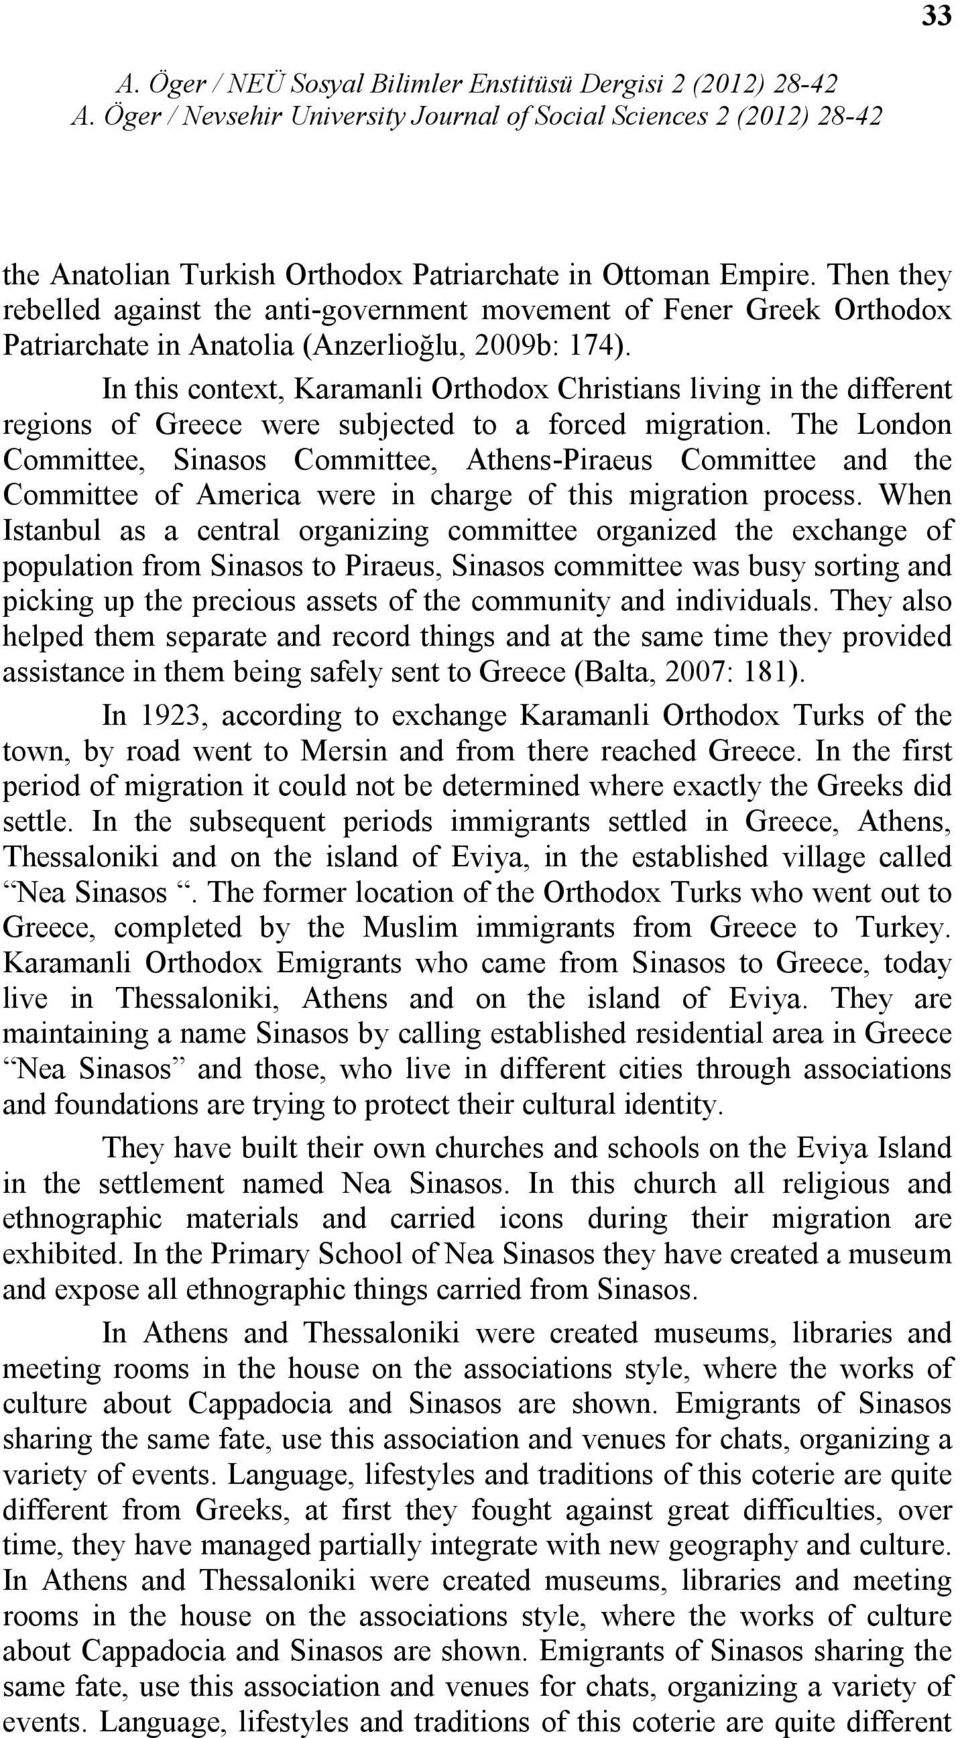 The London Committee, Sinasos Committee, Athens-Piraeus Committee and the Committee of America were in charge of this migration process.